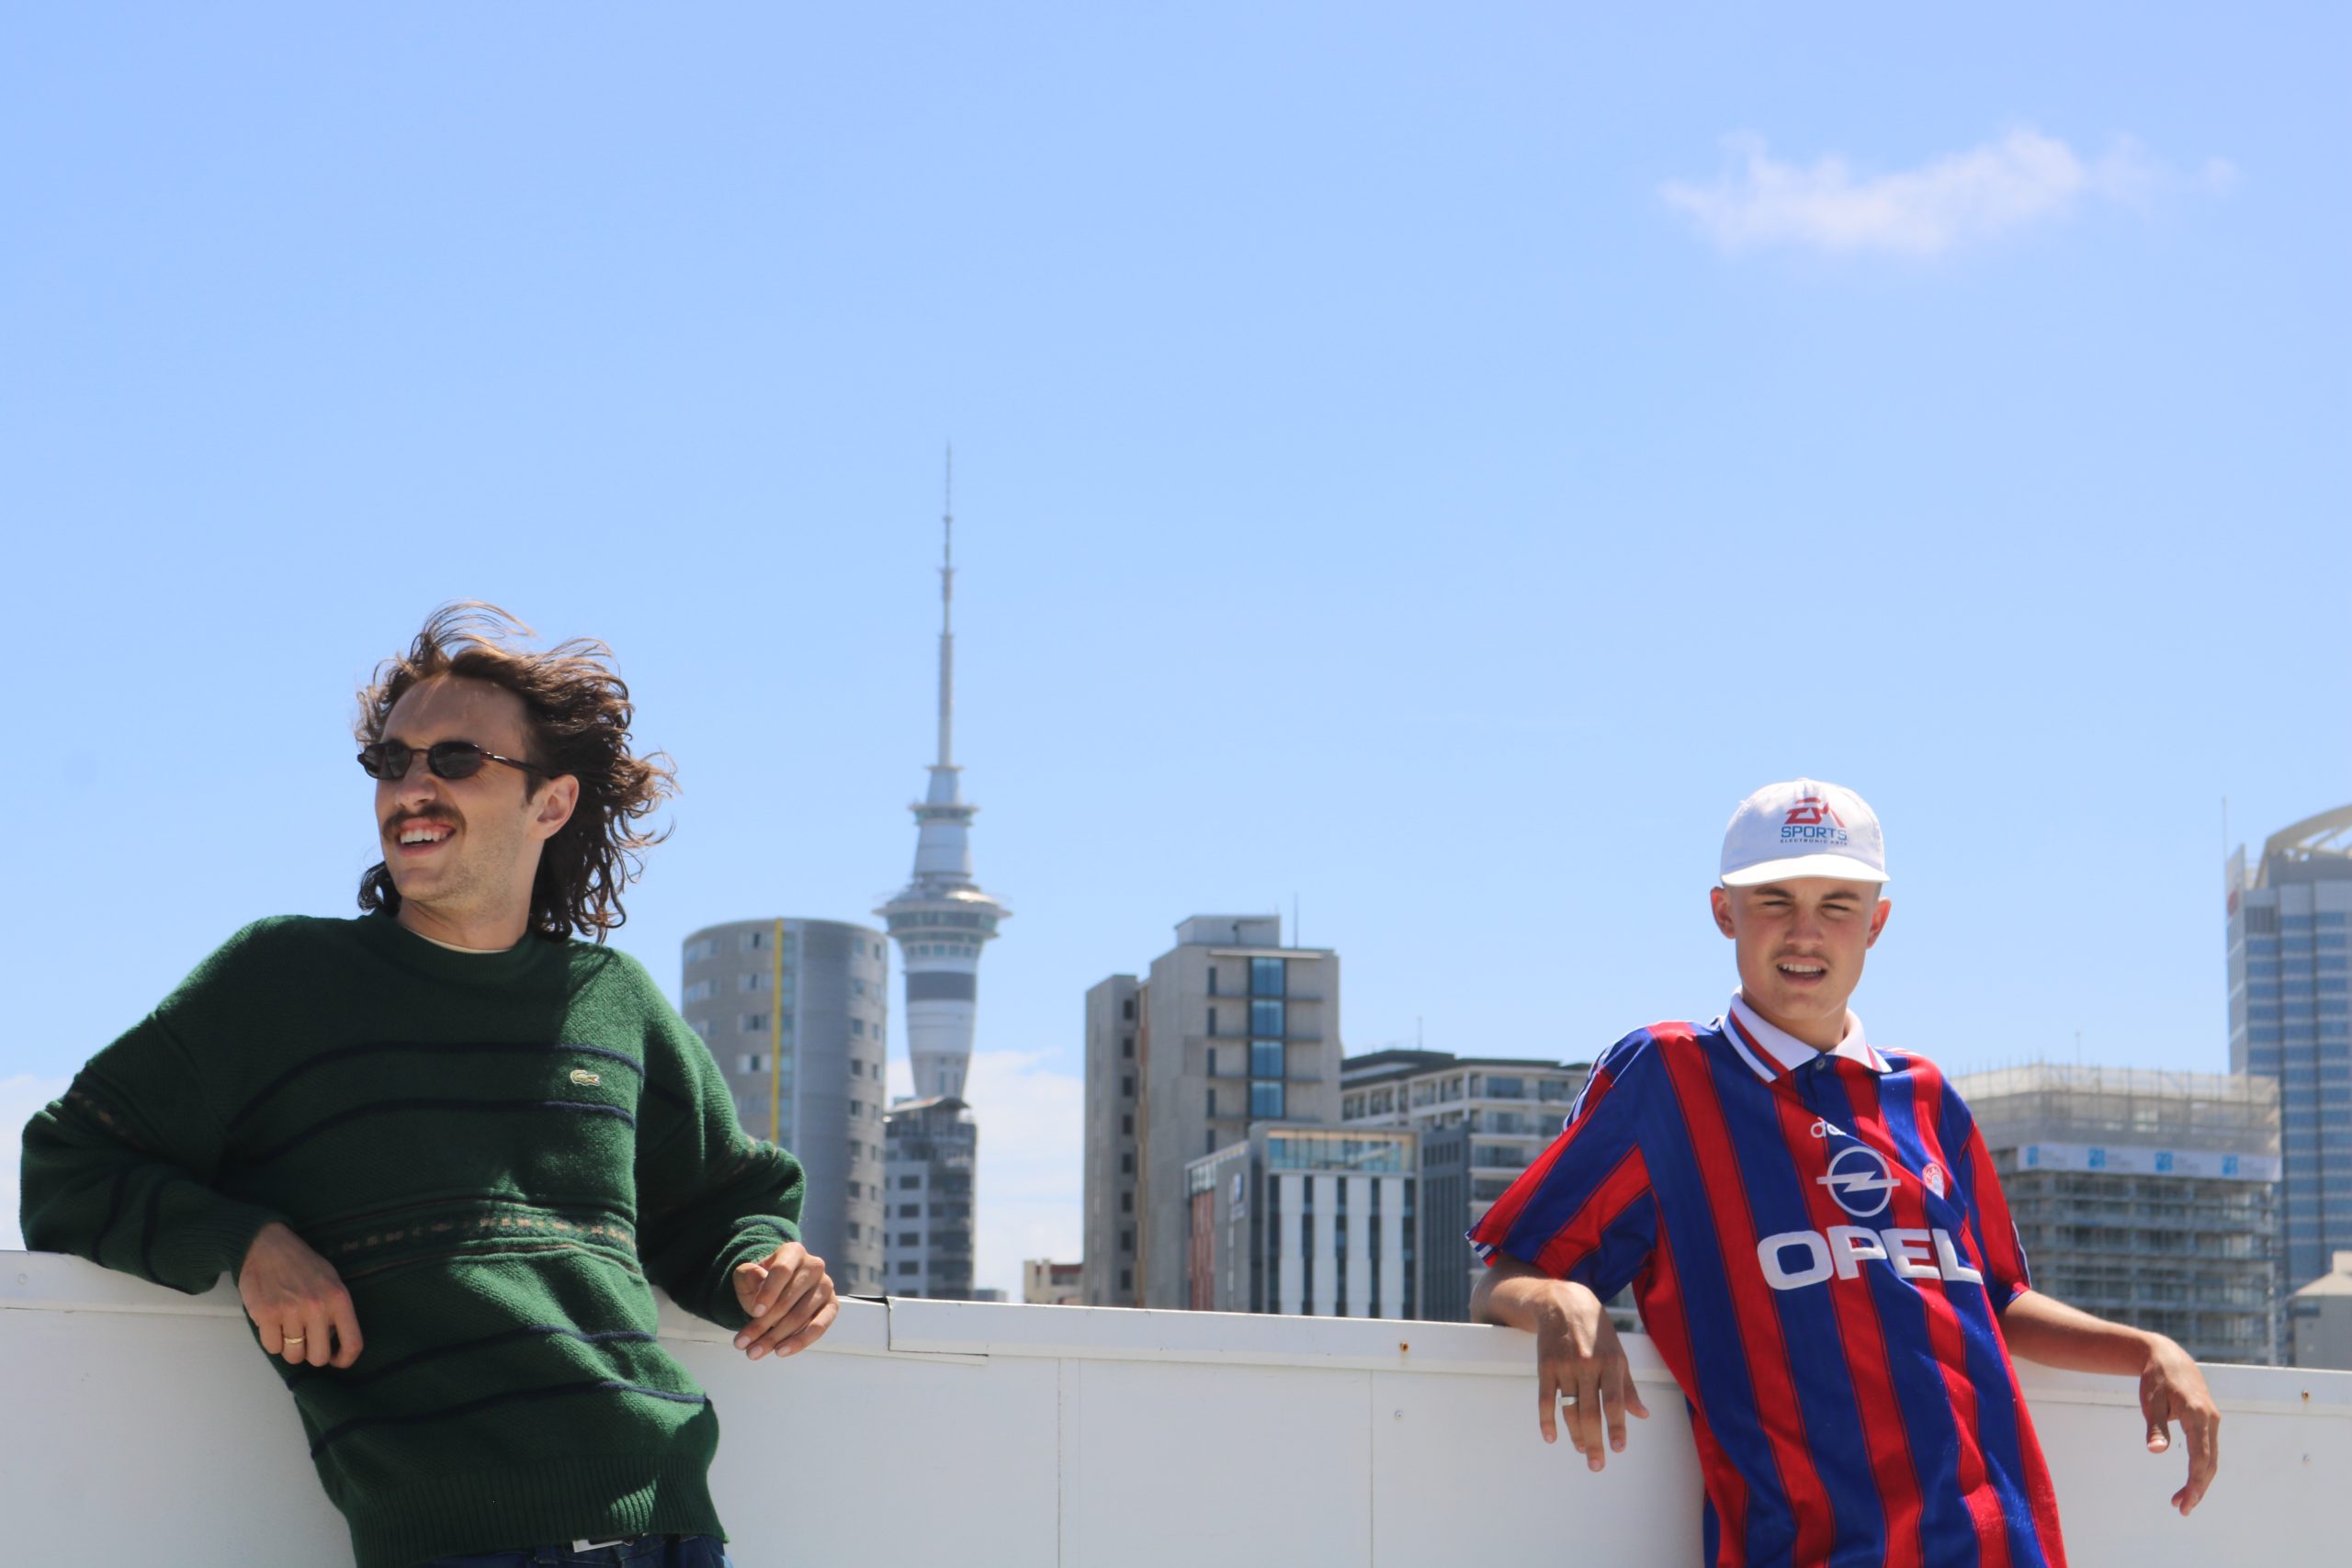 Two men are pictured on a rooftop carpark looking towards the left. The Auckland skytower can be seen in the horizon.